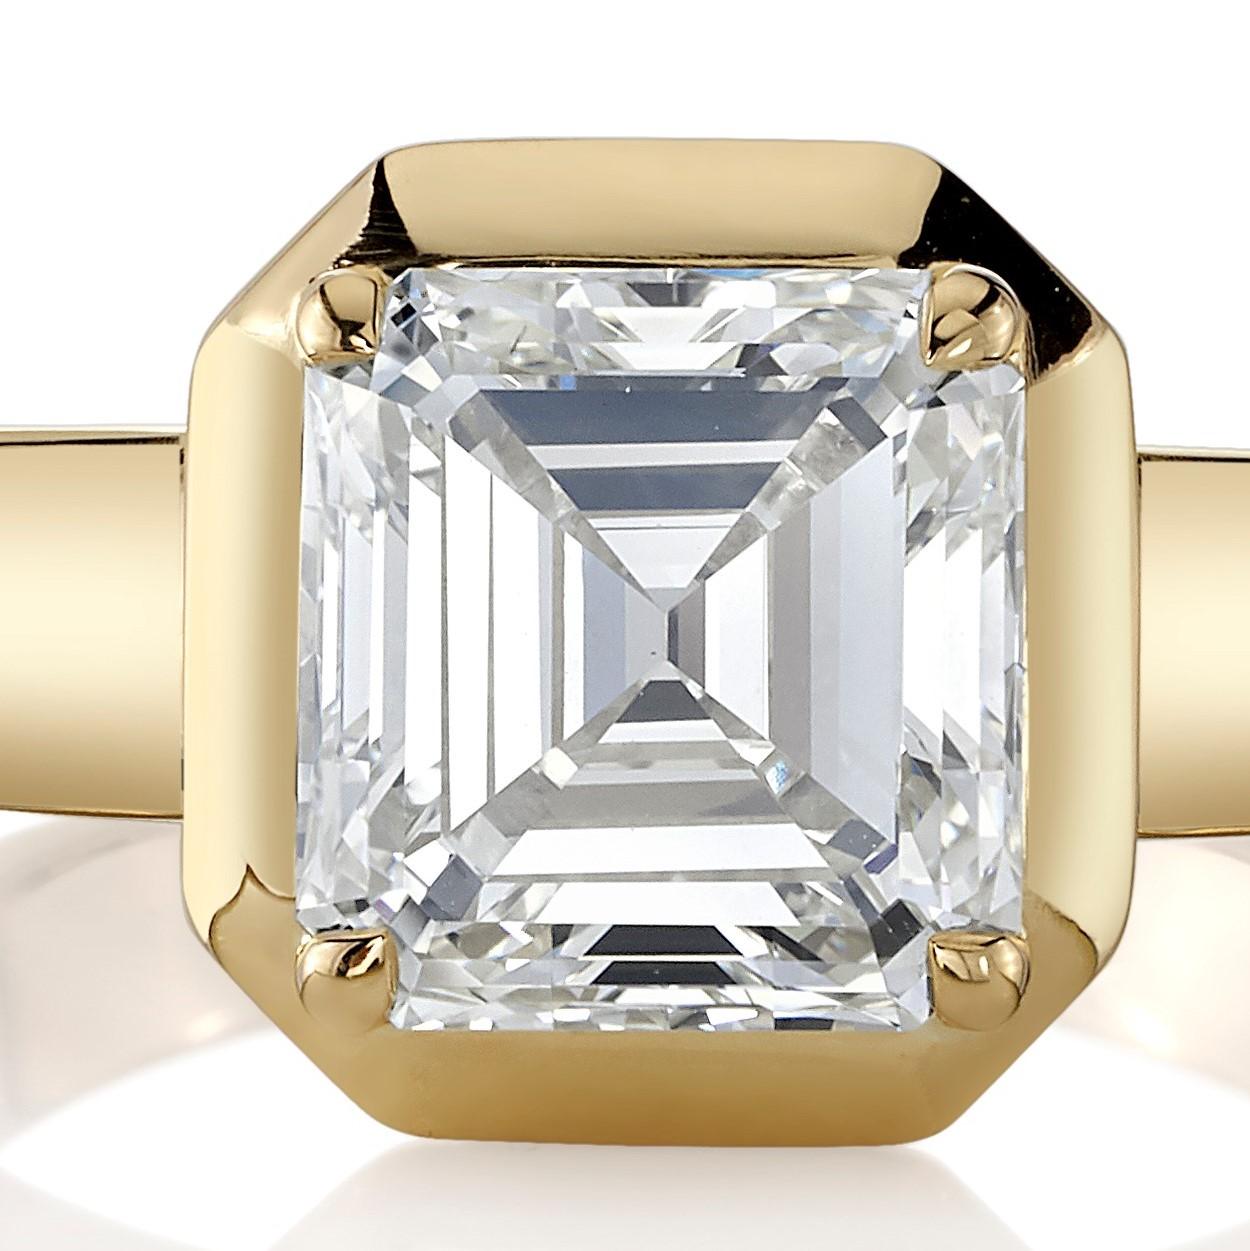 3.01ct L/SI1 GIA certified vintage Asscher cut diamond prong set in a handcrafted 18K yellow gold mounting.

Ring is currently size 6. Please contact us about potential re-sizing.

Our jewelry is made locally in Los Angeles and most pieces are made